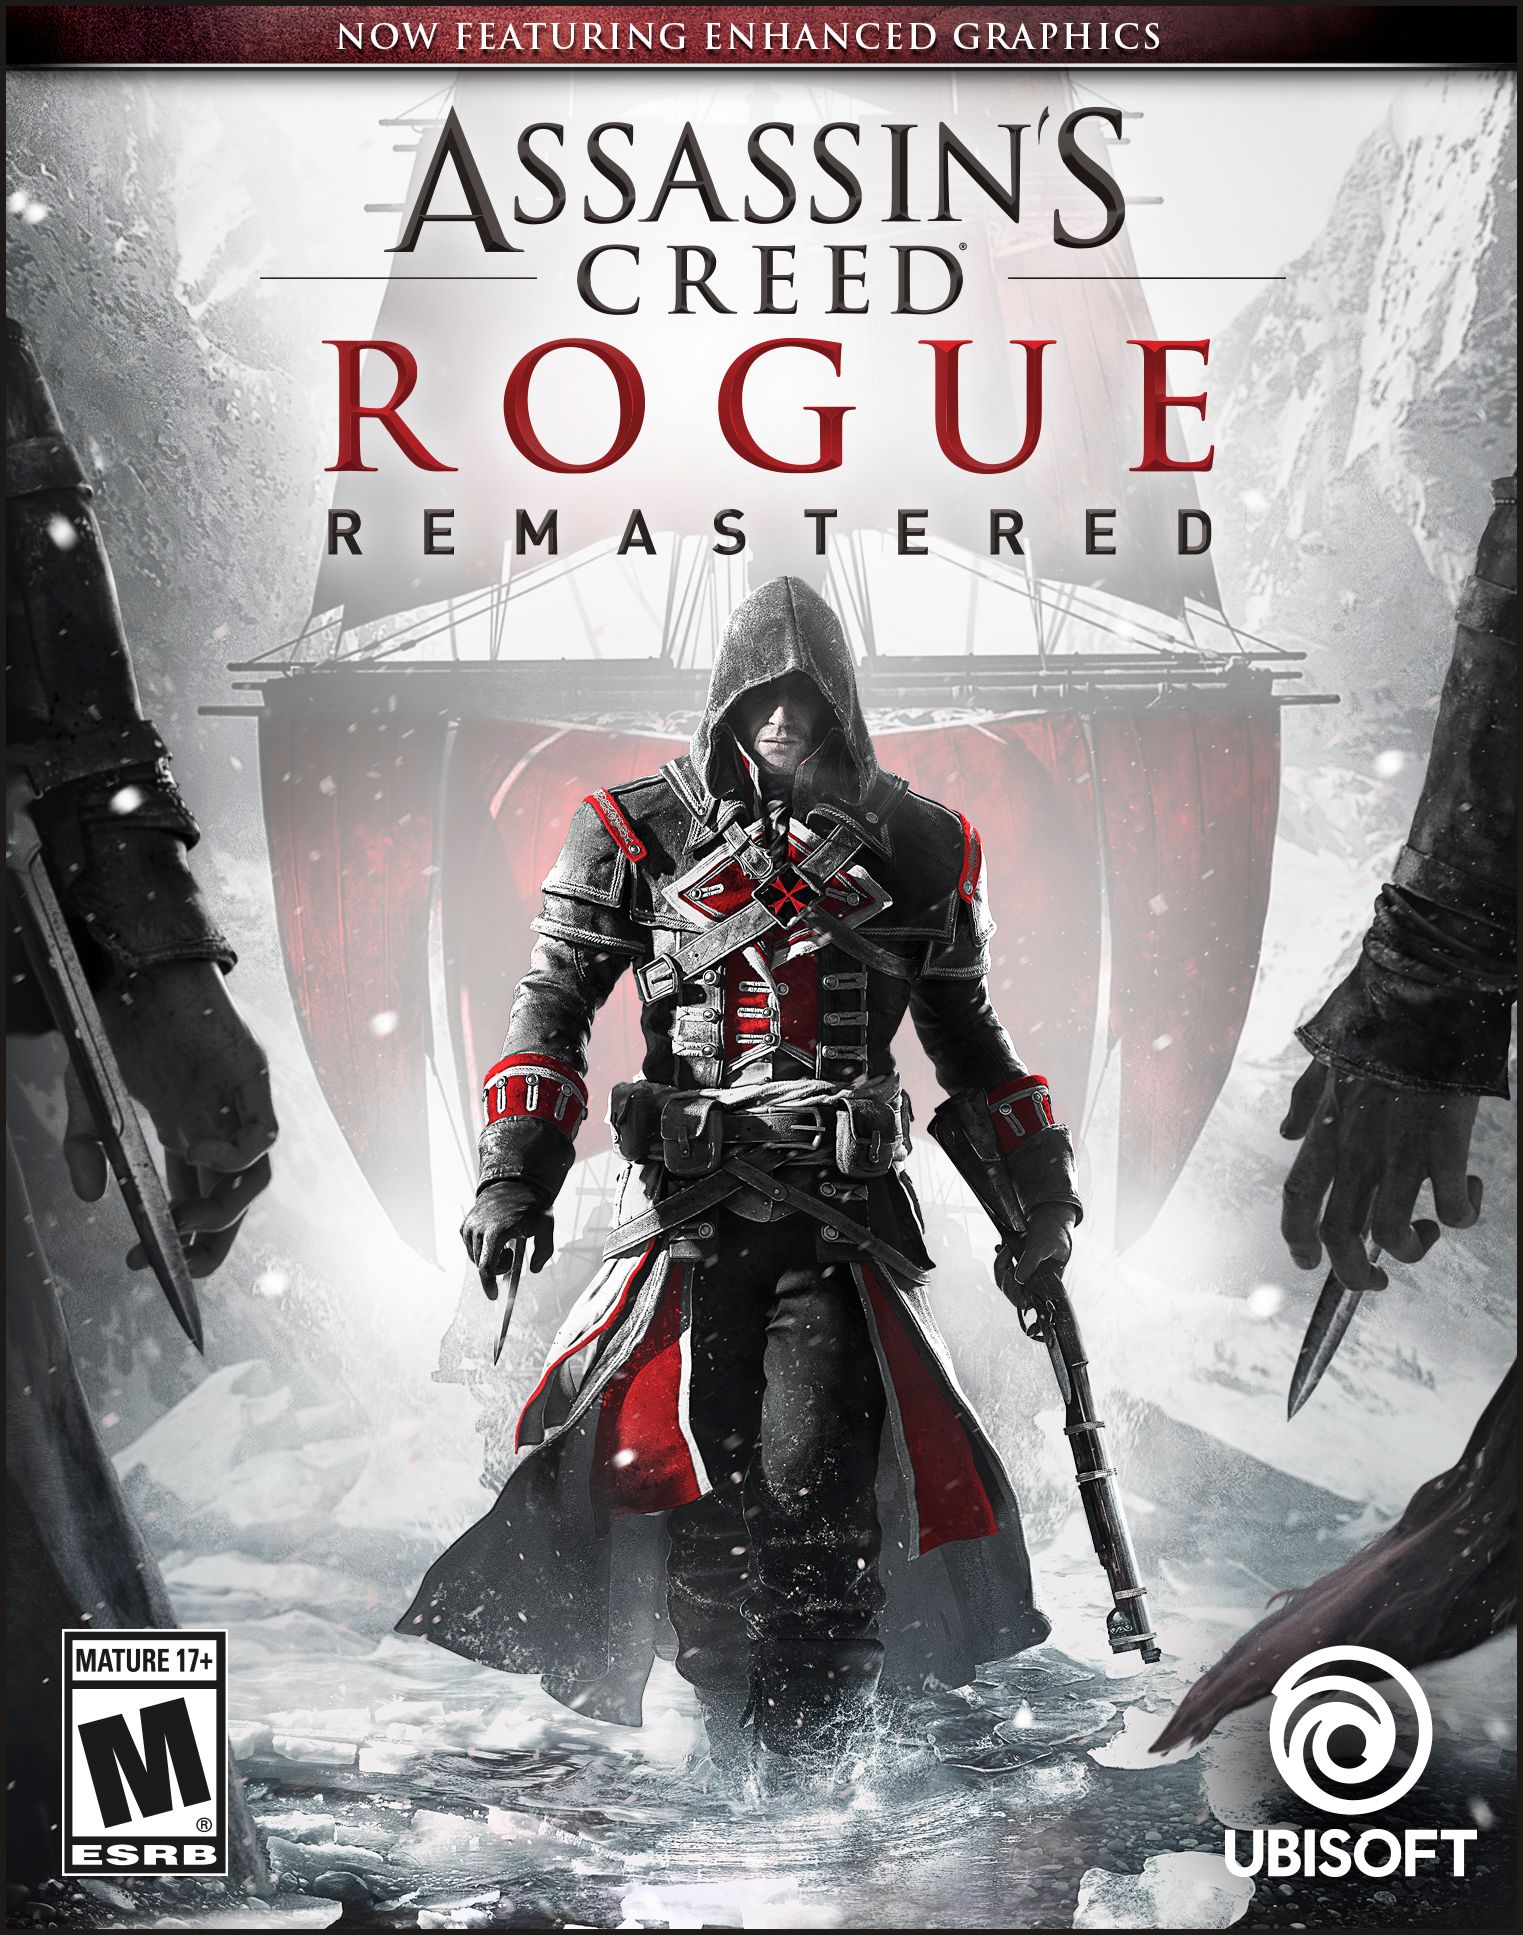 Assassin's Creed Rogue Remastered Announced; Includes All DLC